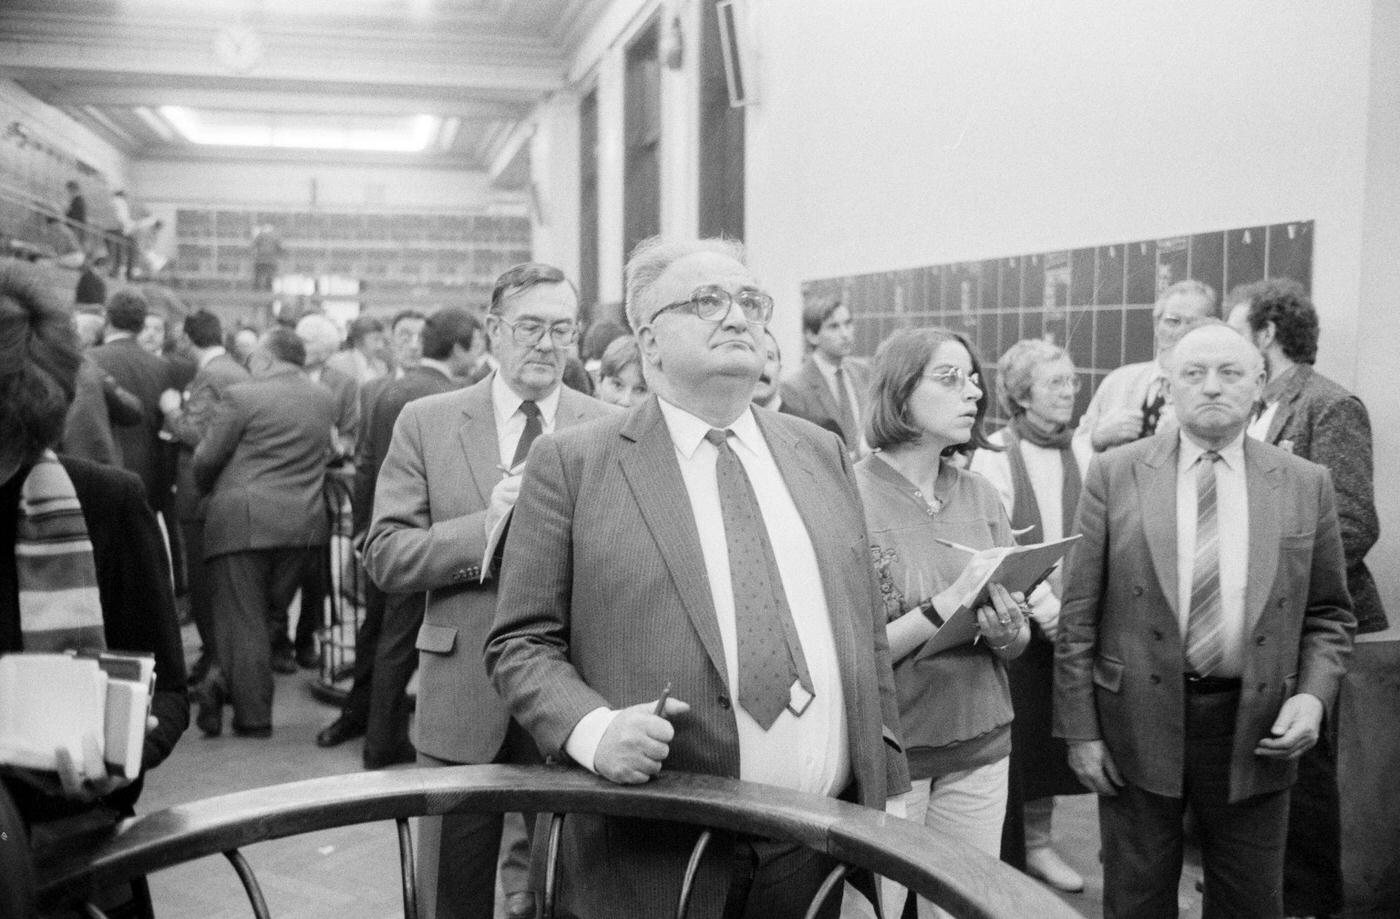 Broker Examining the Value Board at the Brussels Stock Exchange, 1987